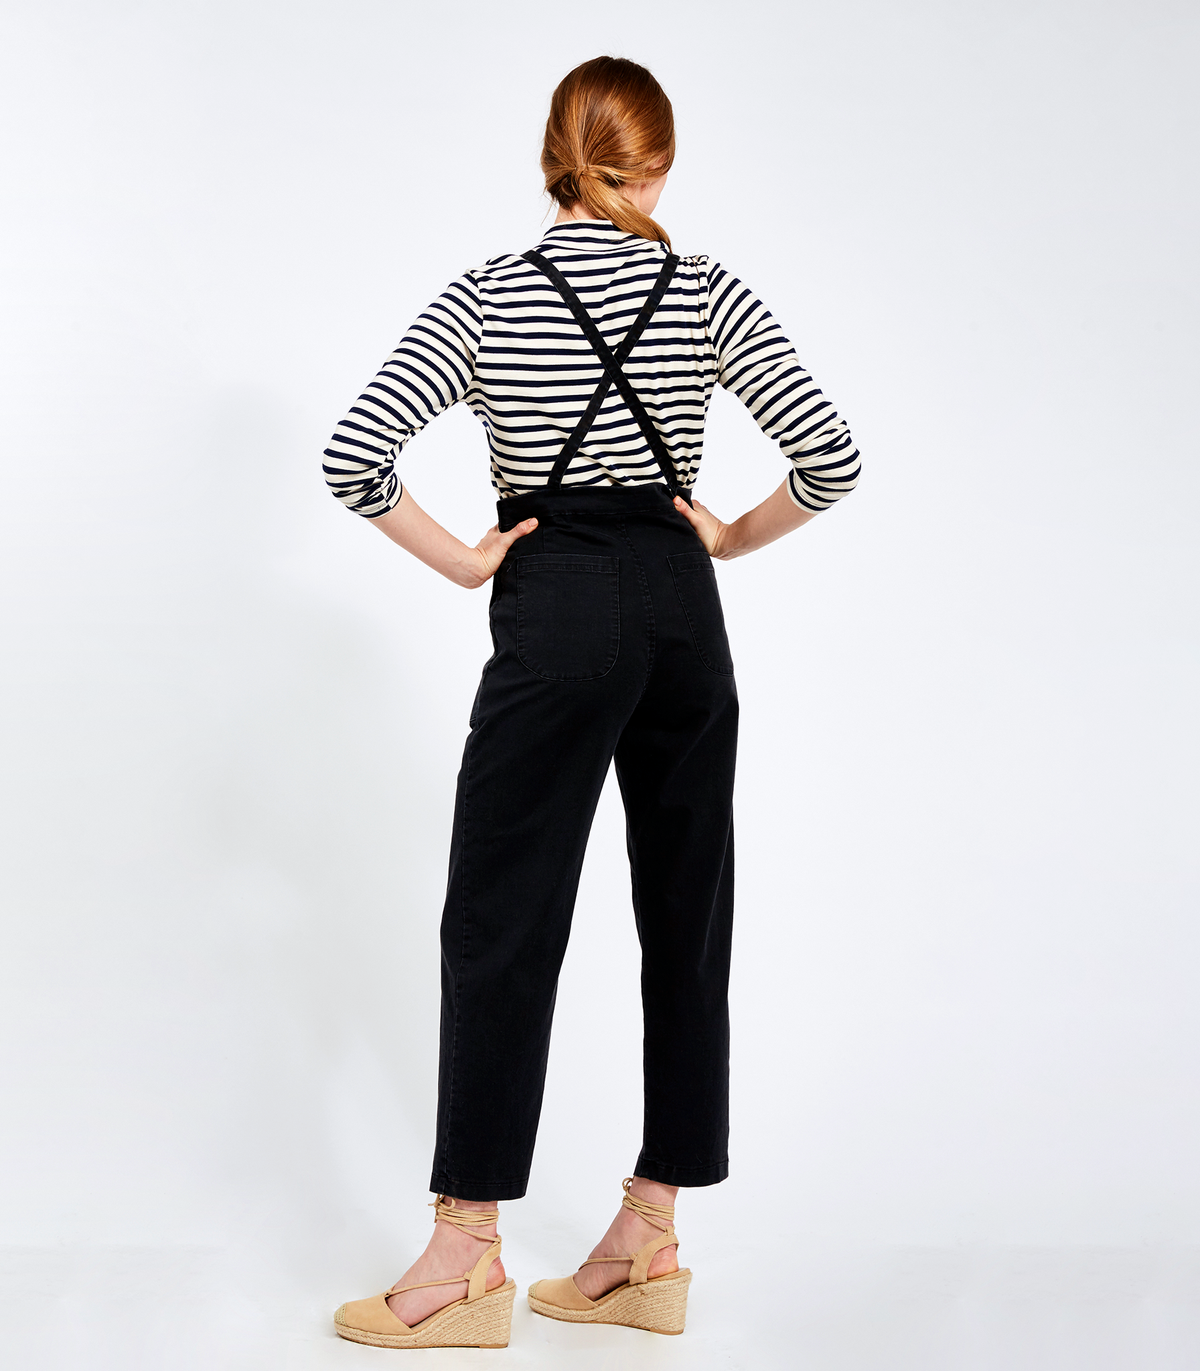 LOUP Black Knot Overalls